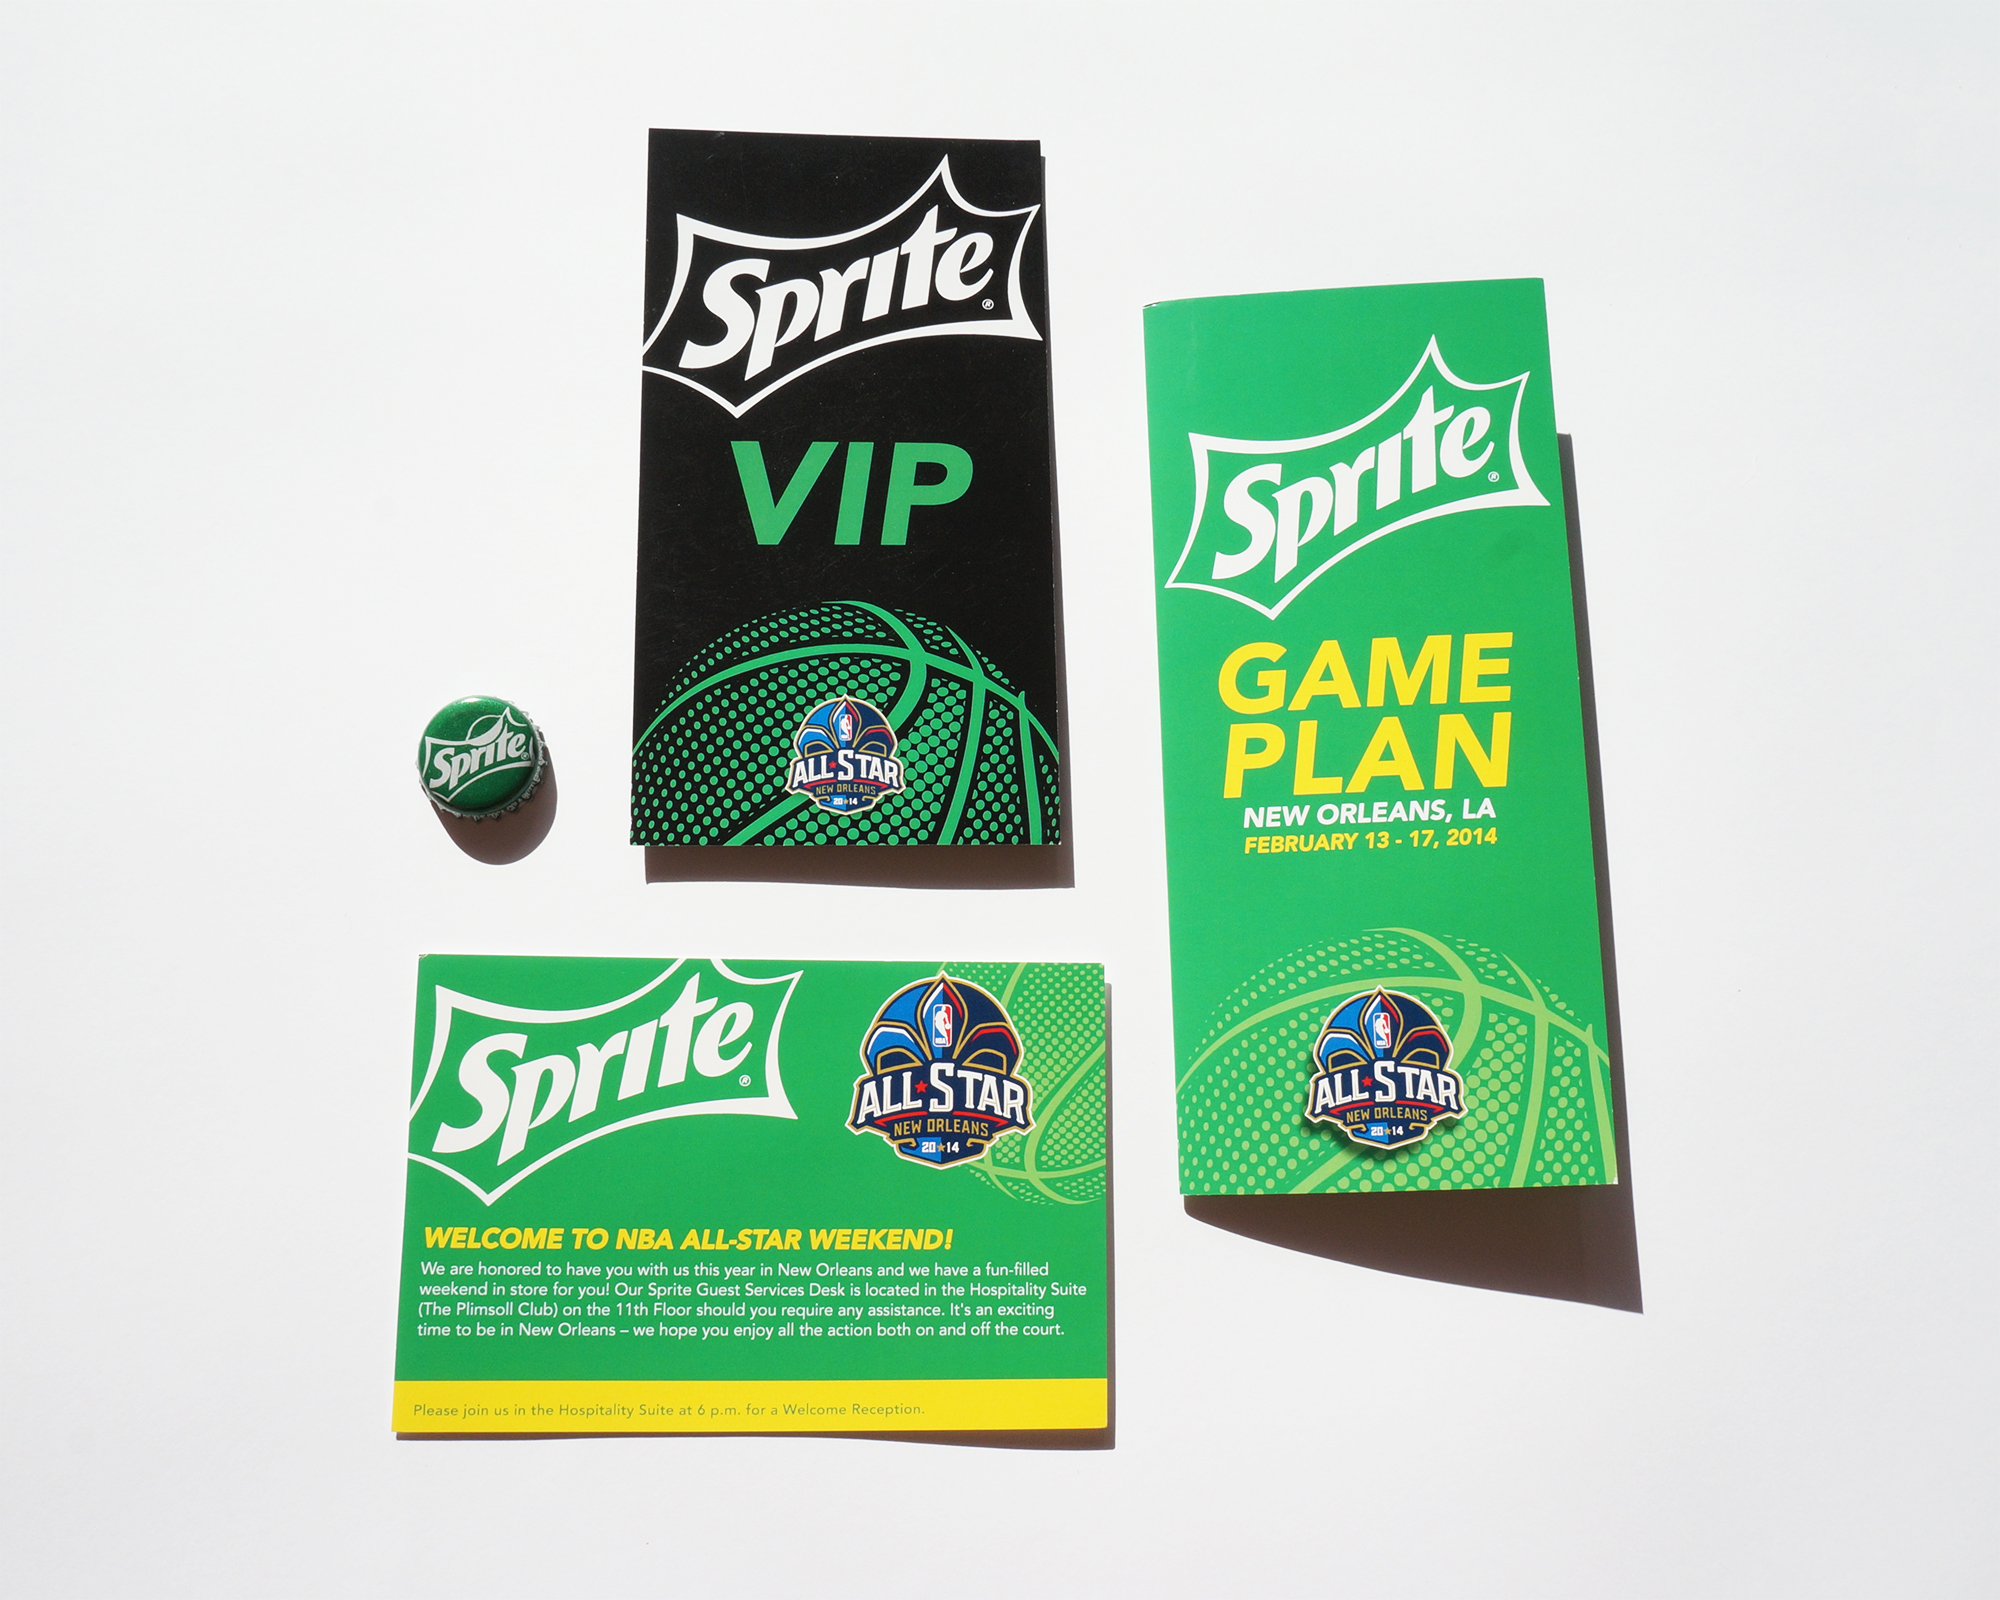 Sprite 2014 NBA All Star Weekend Collateral